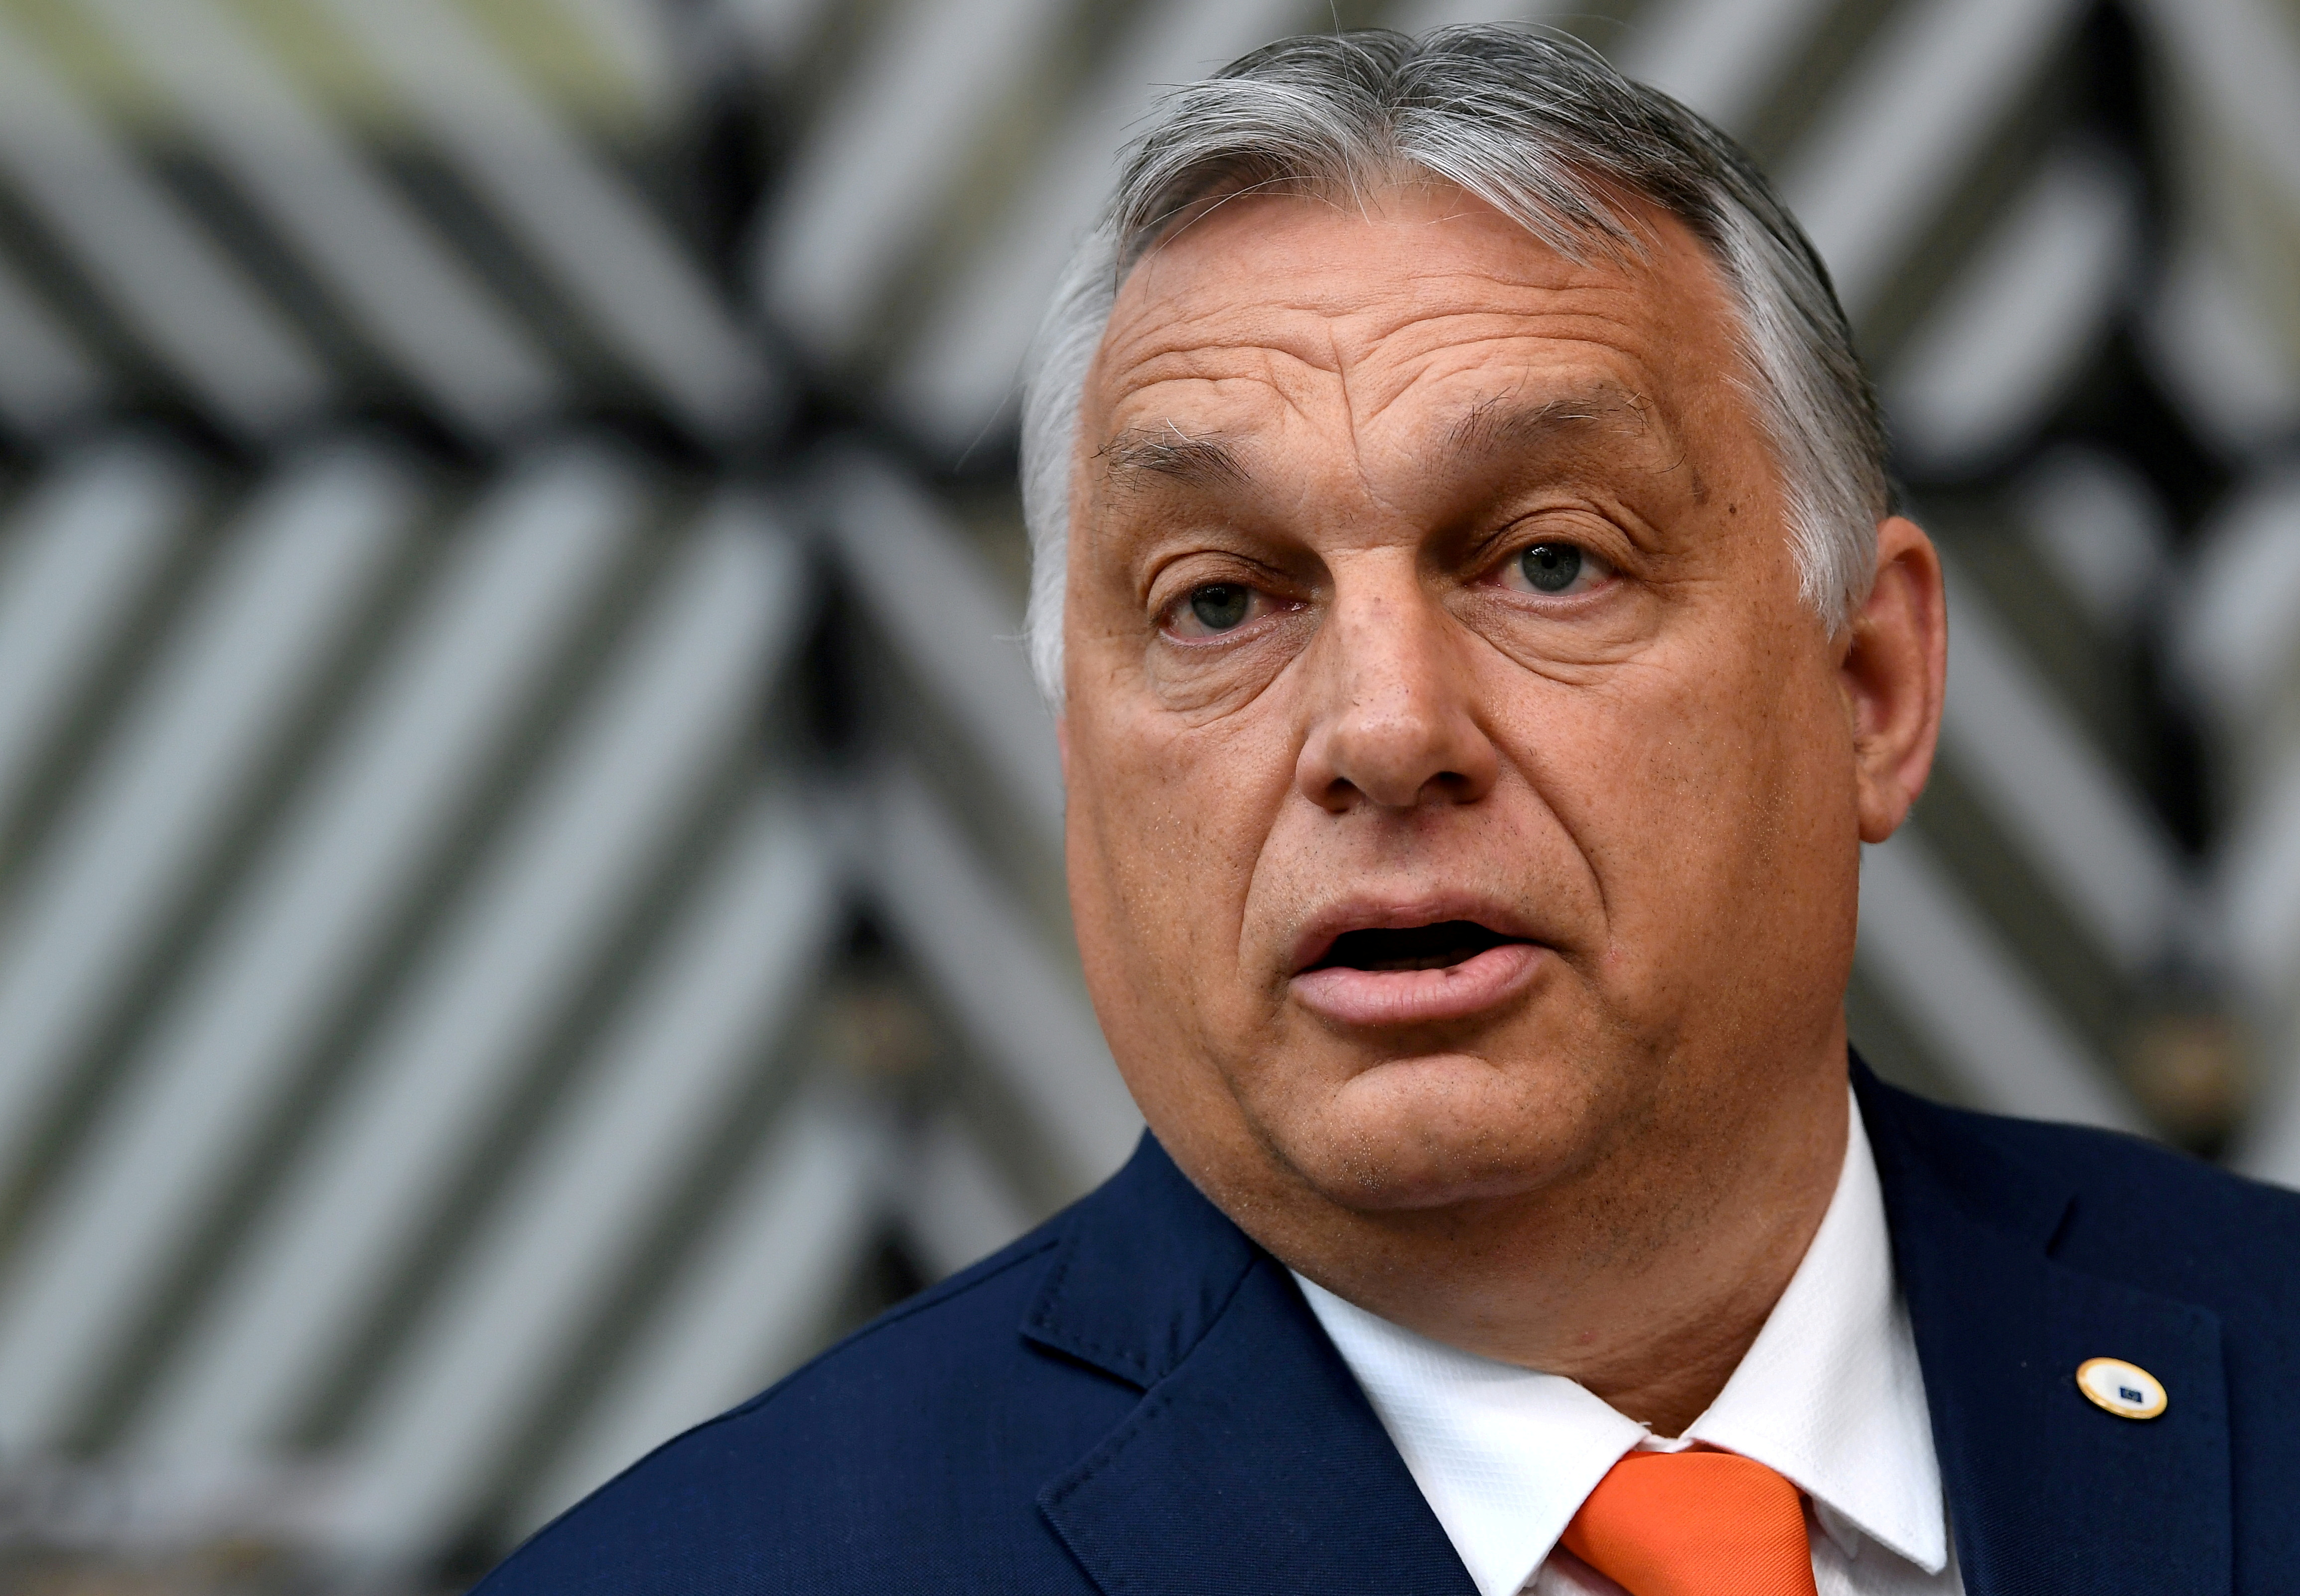 Hungary's Prime Minister Viktor Orban addresses the media as he arrives on the first day of the European Union summit at The European Council Building in Brussels, Belgium June 24, 2021.